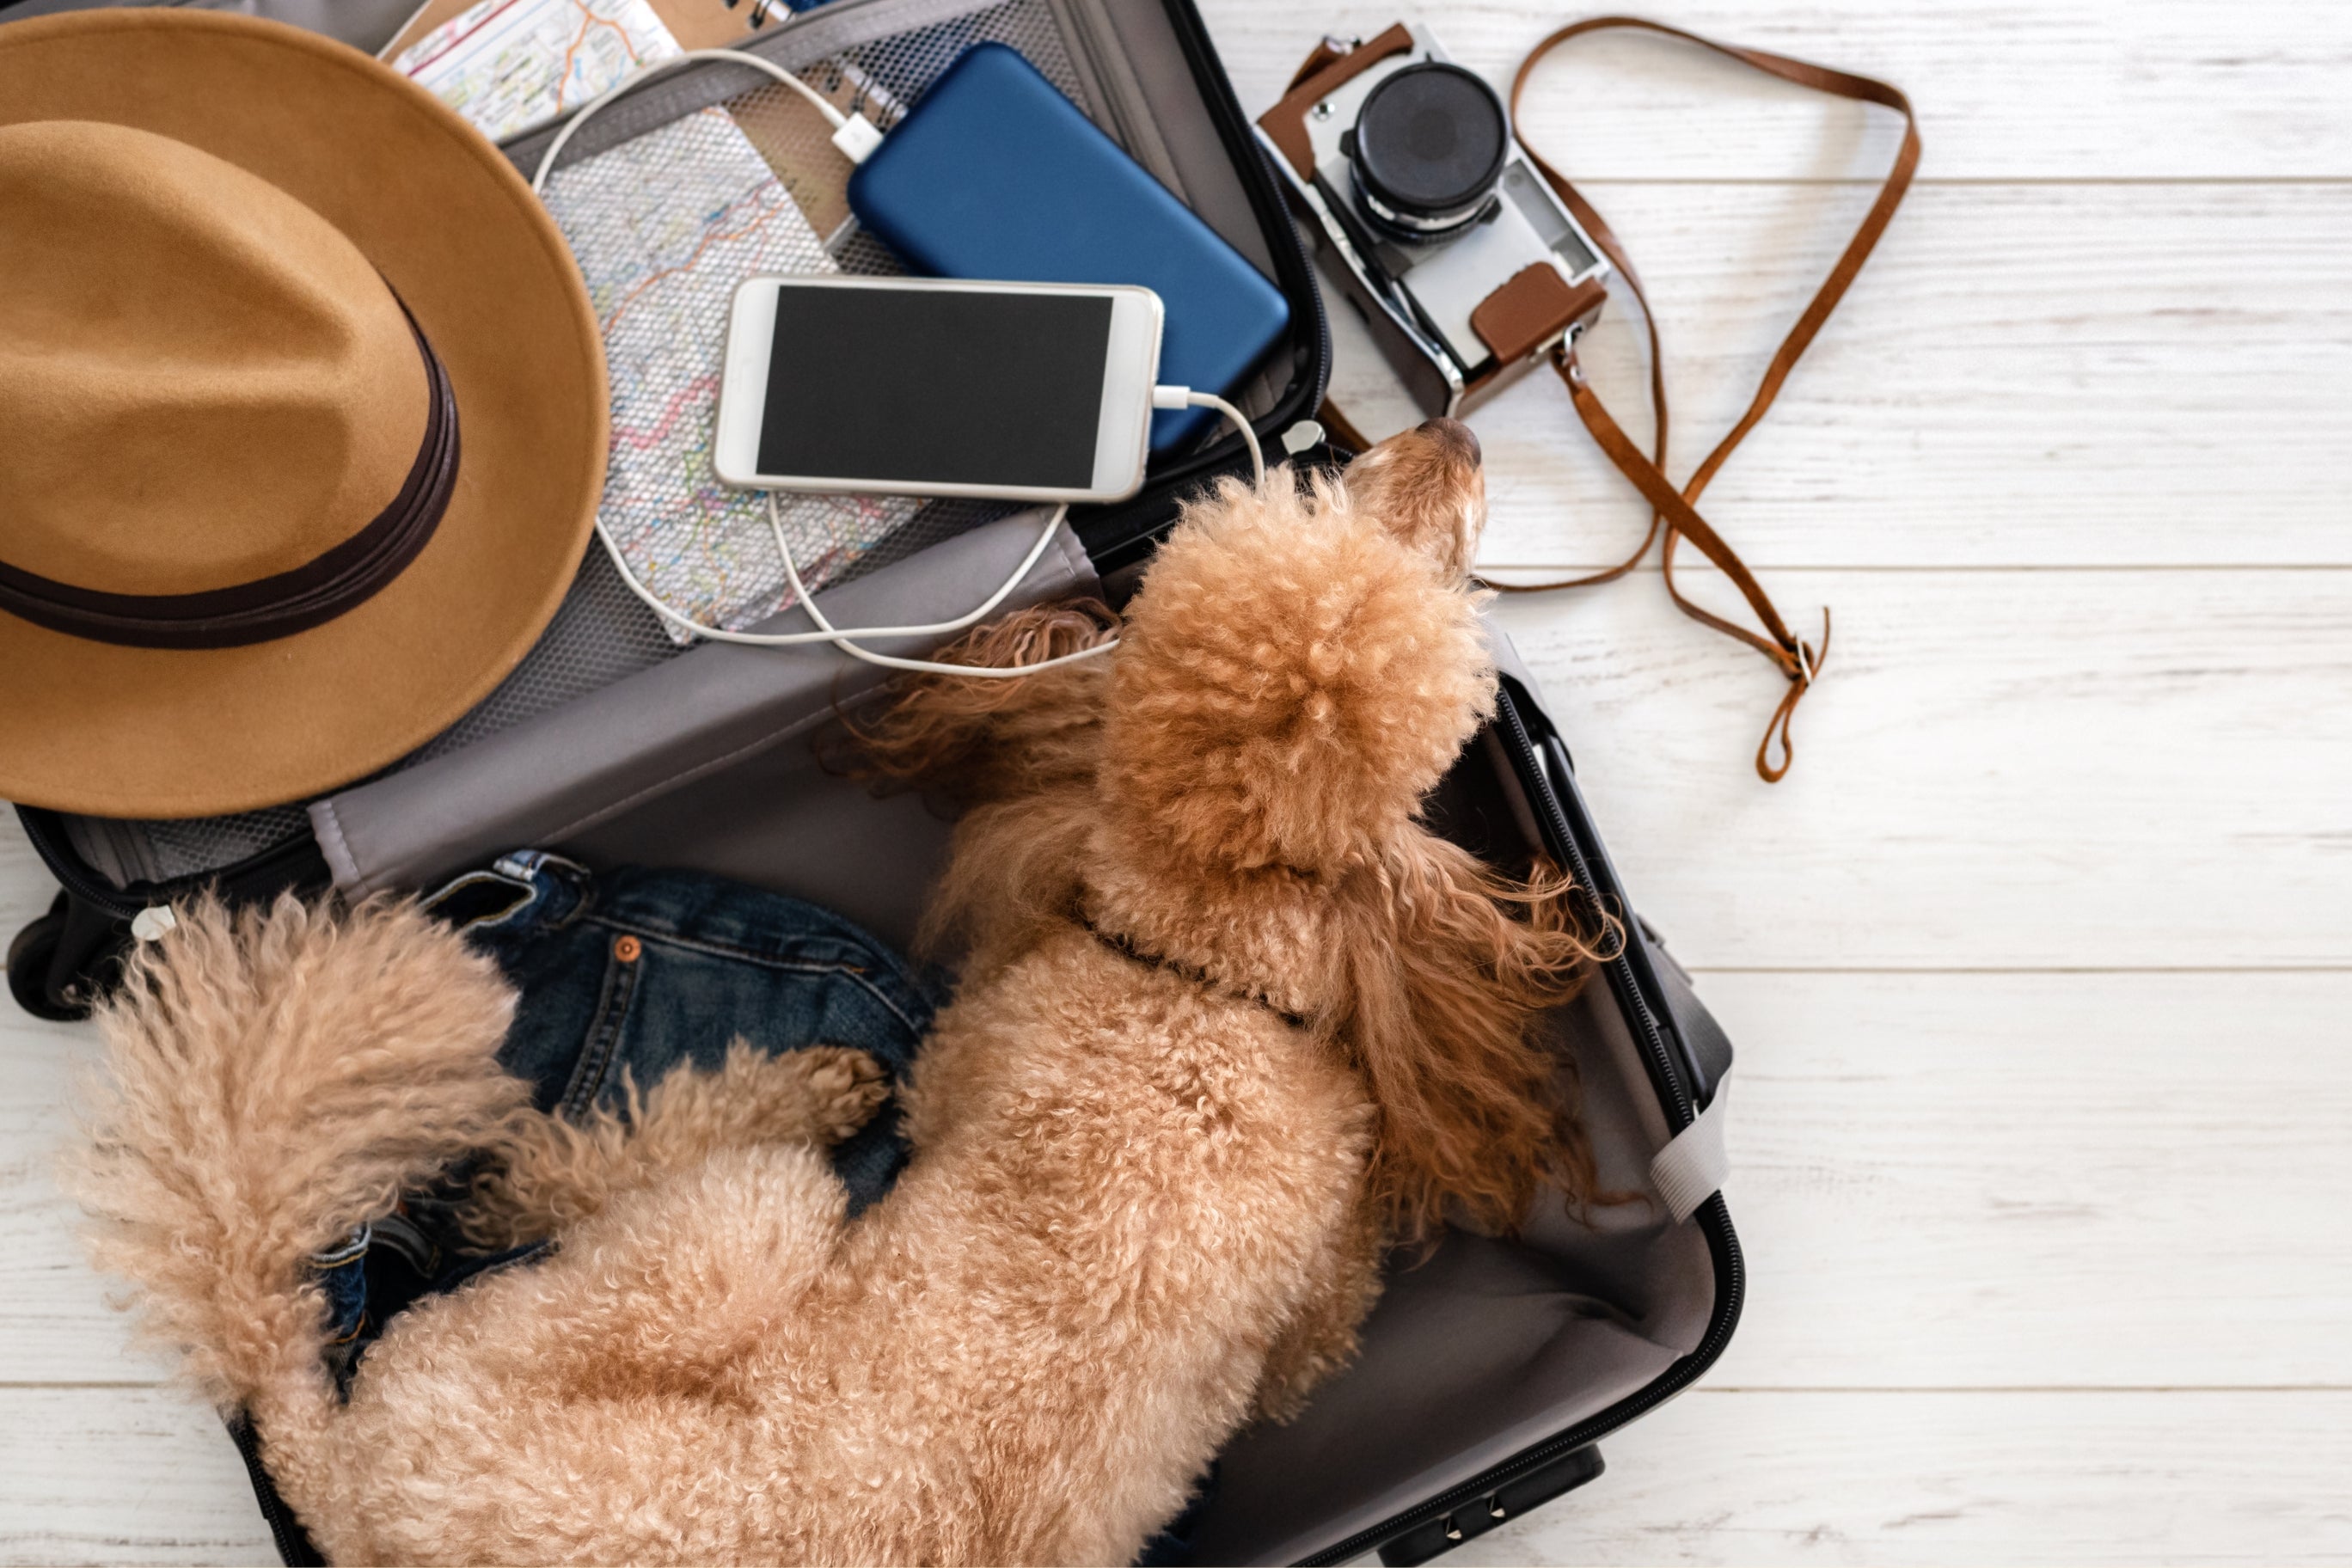 Travelling with a Dog, Suitecase with a Dog, and Tips for Travelling with a Dog